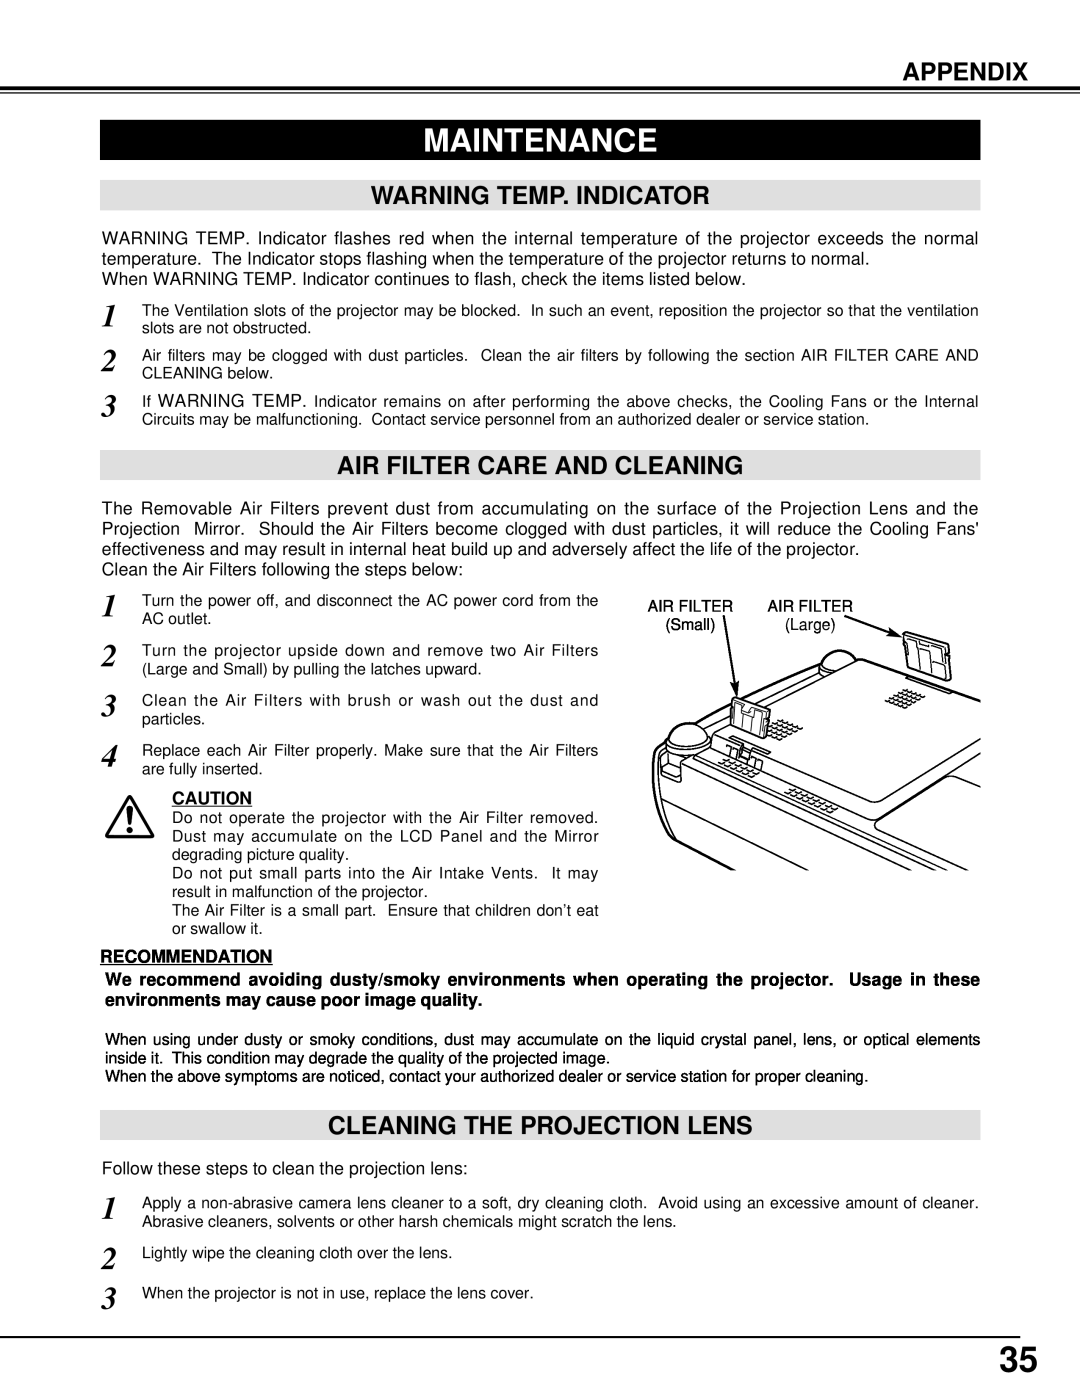 Canon 5100 Maintenance, Warning Temp. Indicator, Air Filter Care And Cleaning, Cleaning The Projection Lens, Appendix 